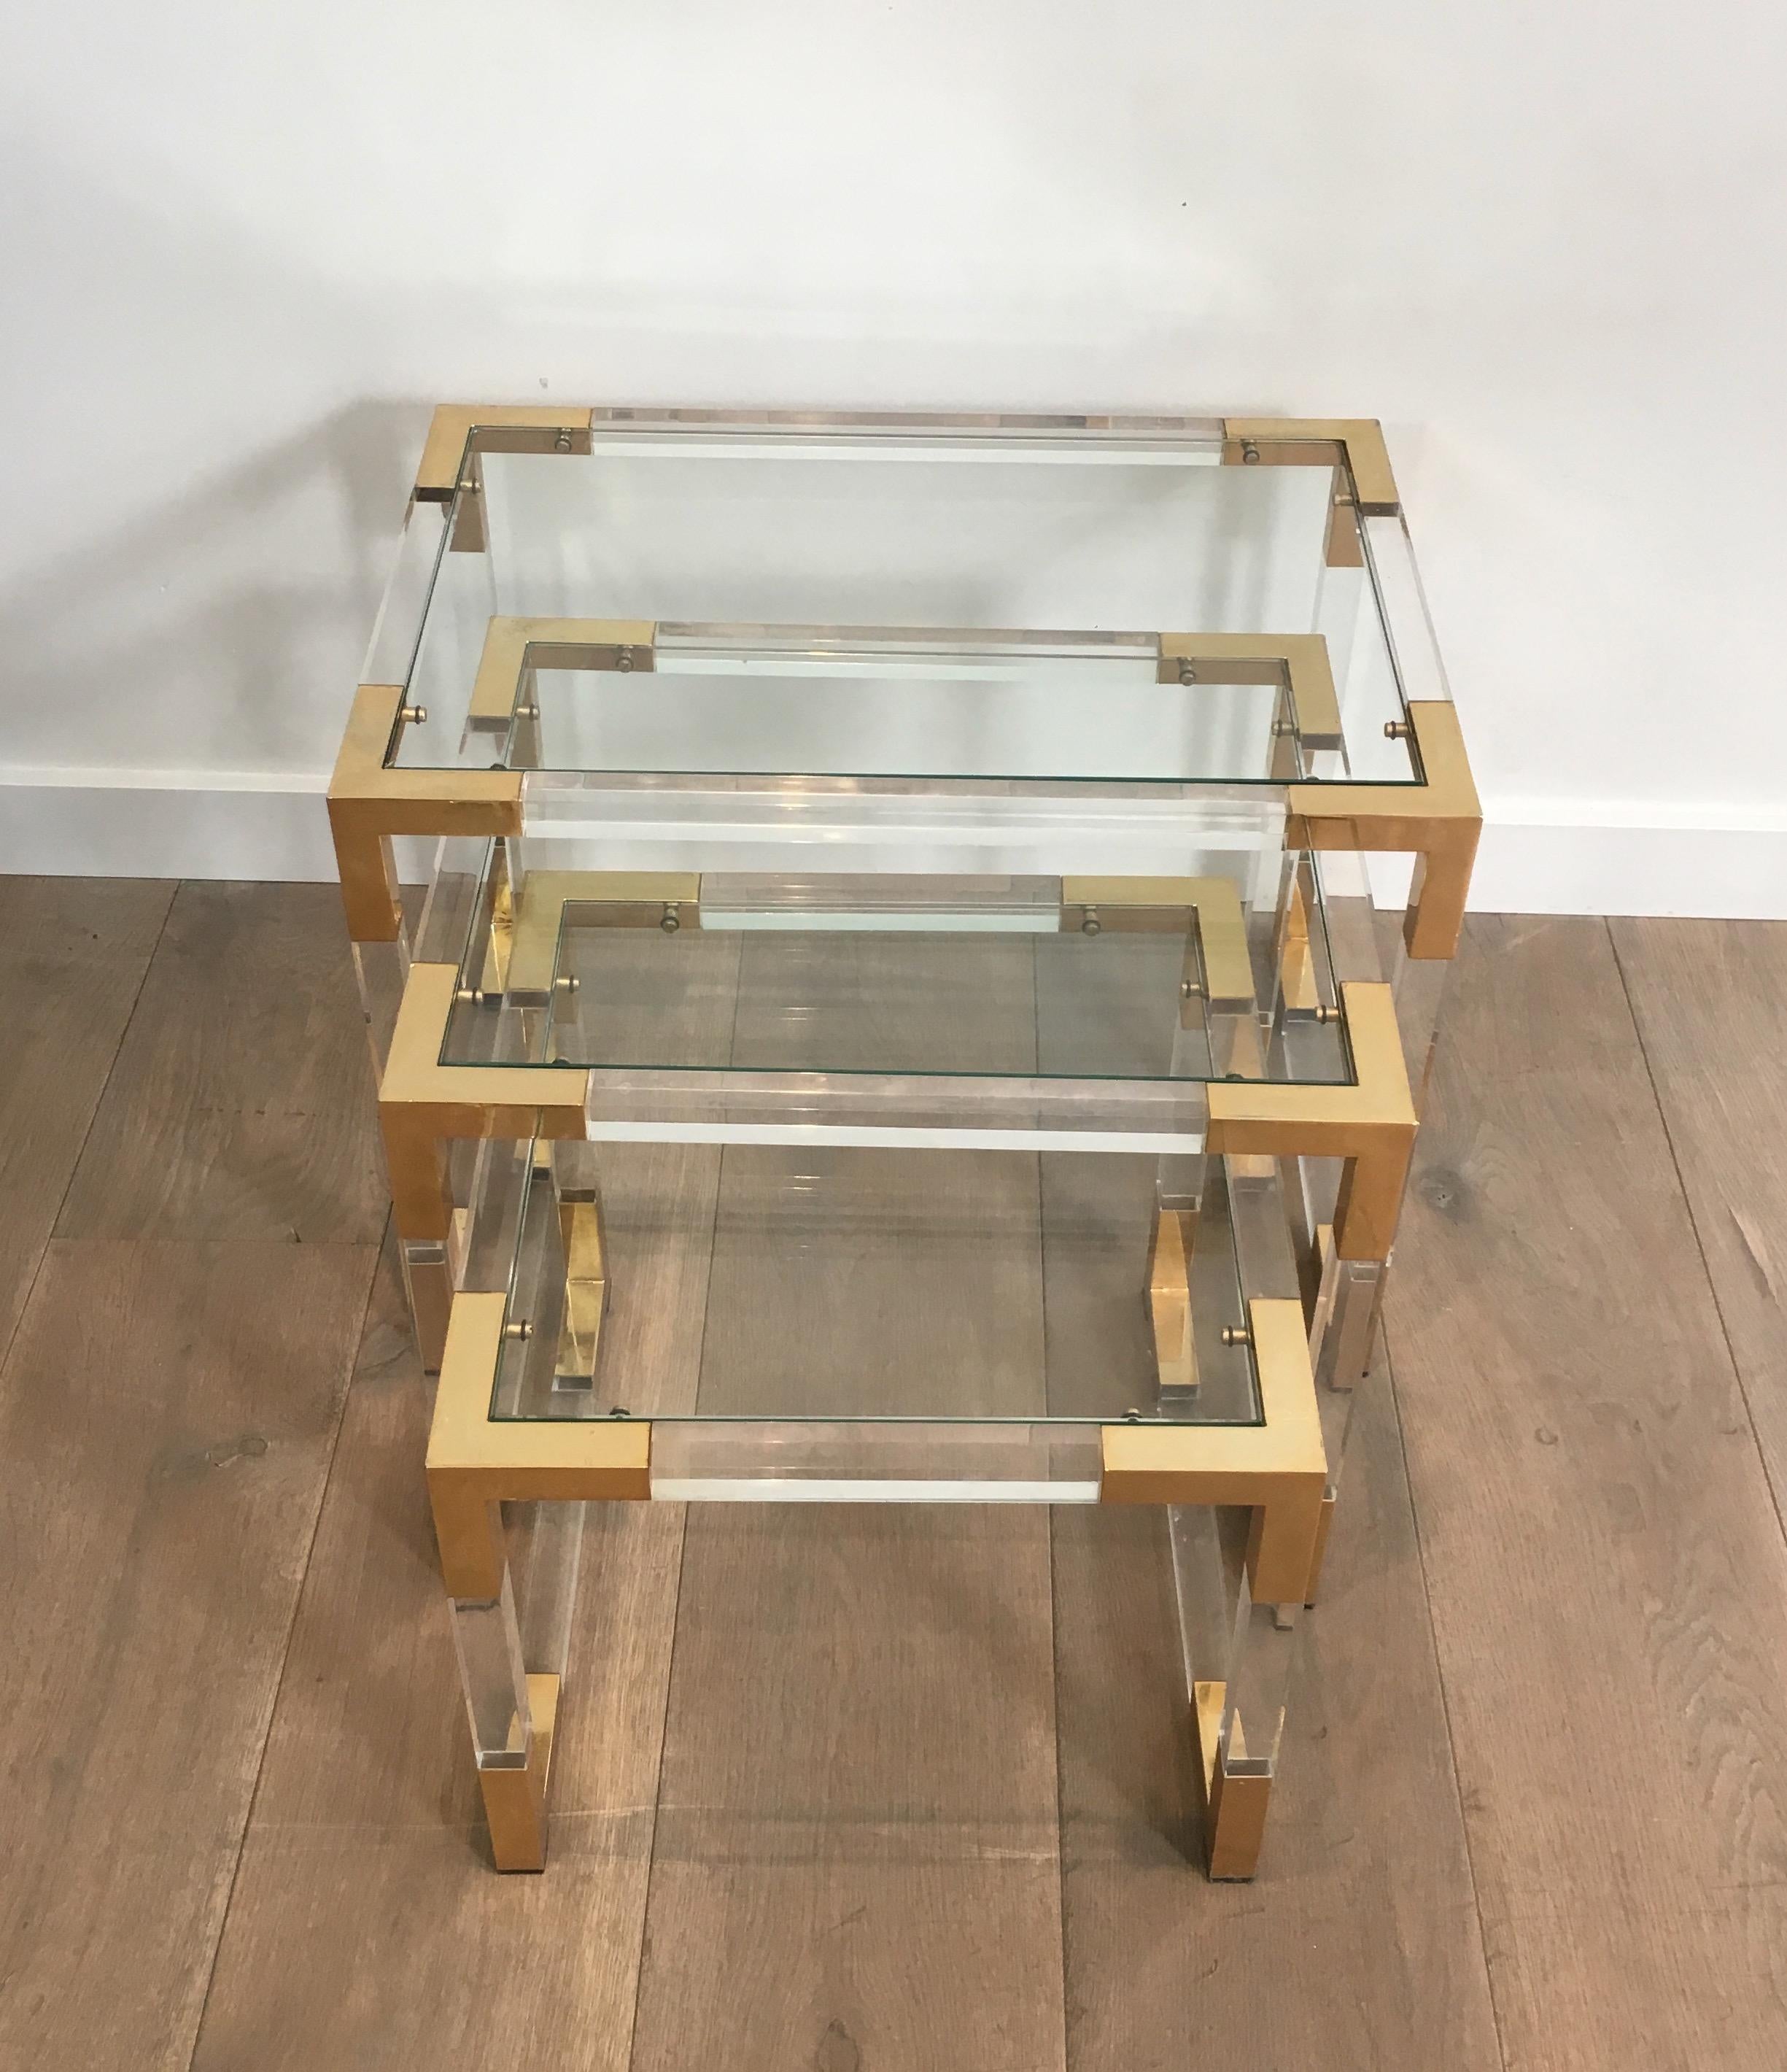 This set of 3 nesting tables is made of a Lucite base with gilt corners and glass shelves on top. These tables are very nice, simple and decorative and can be used individually, as side tables or even as a coffee table. This is a French work, in the